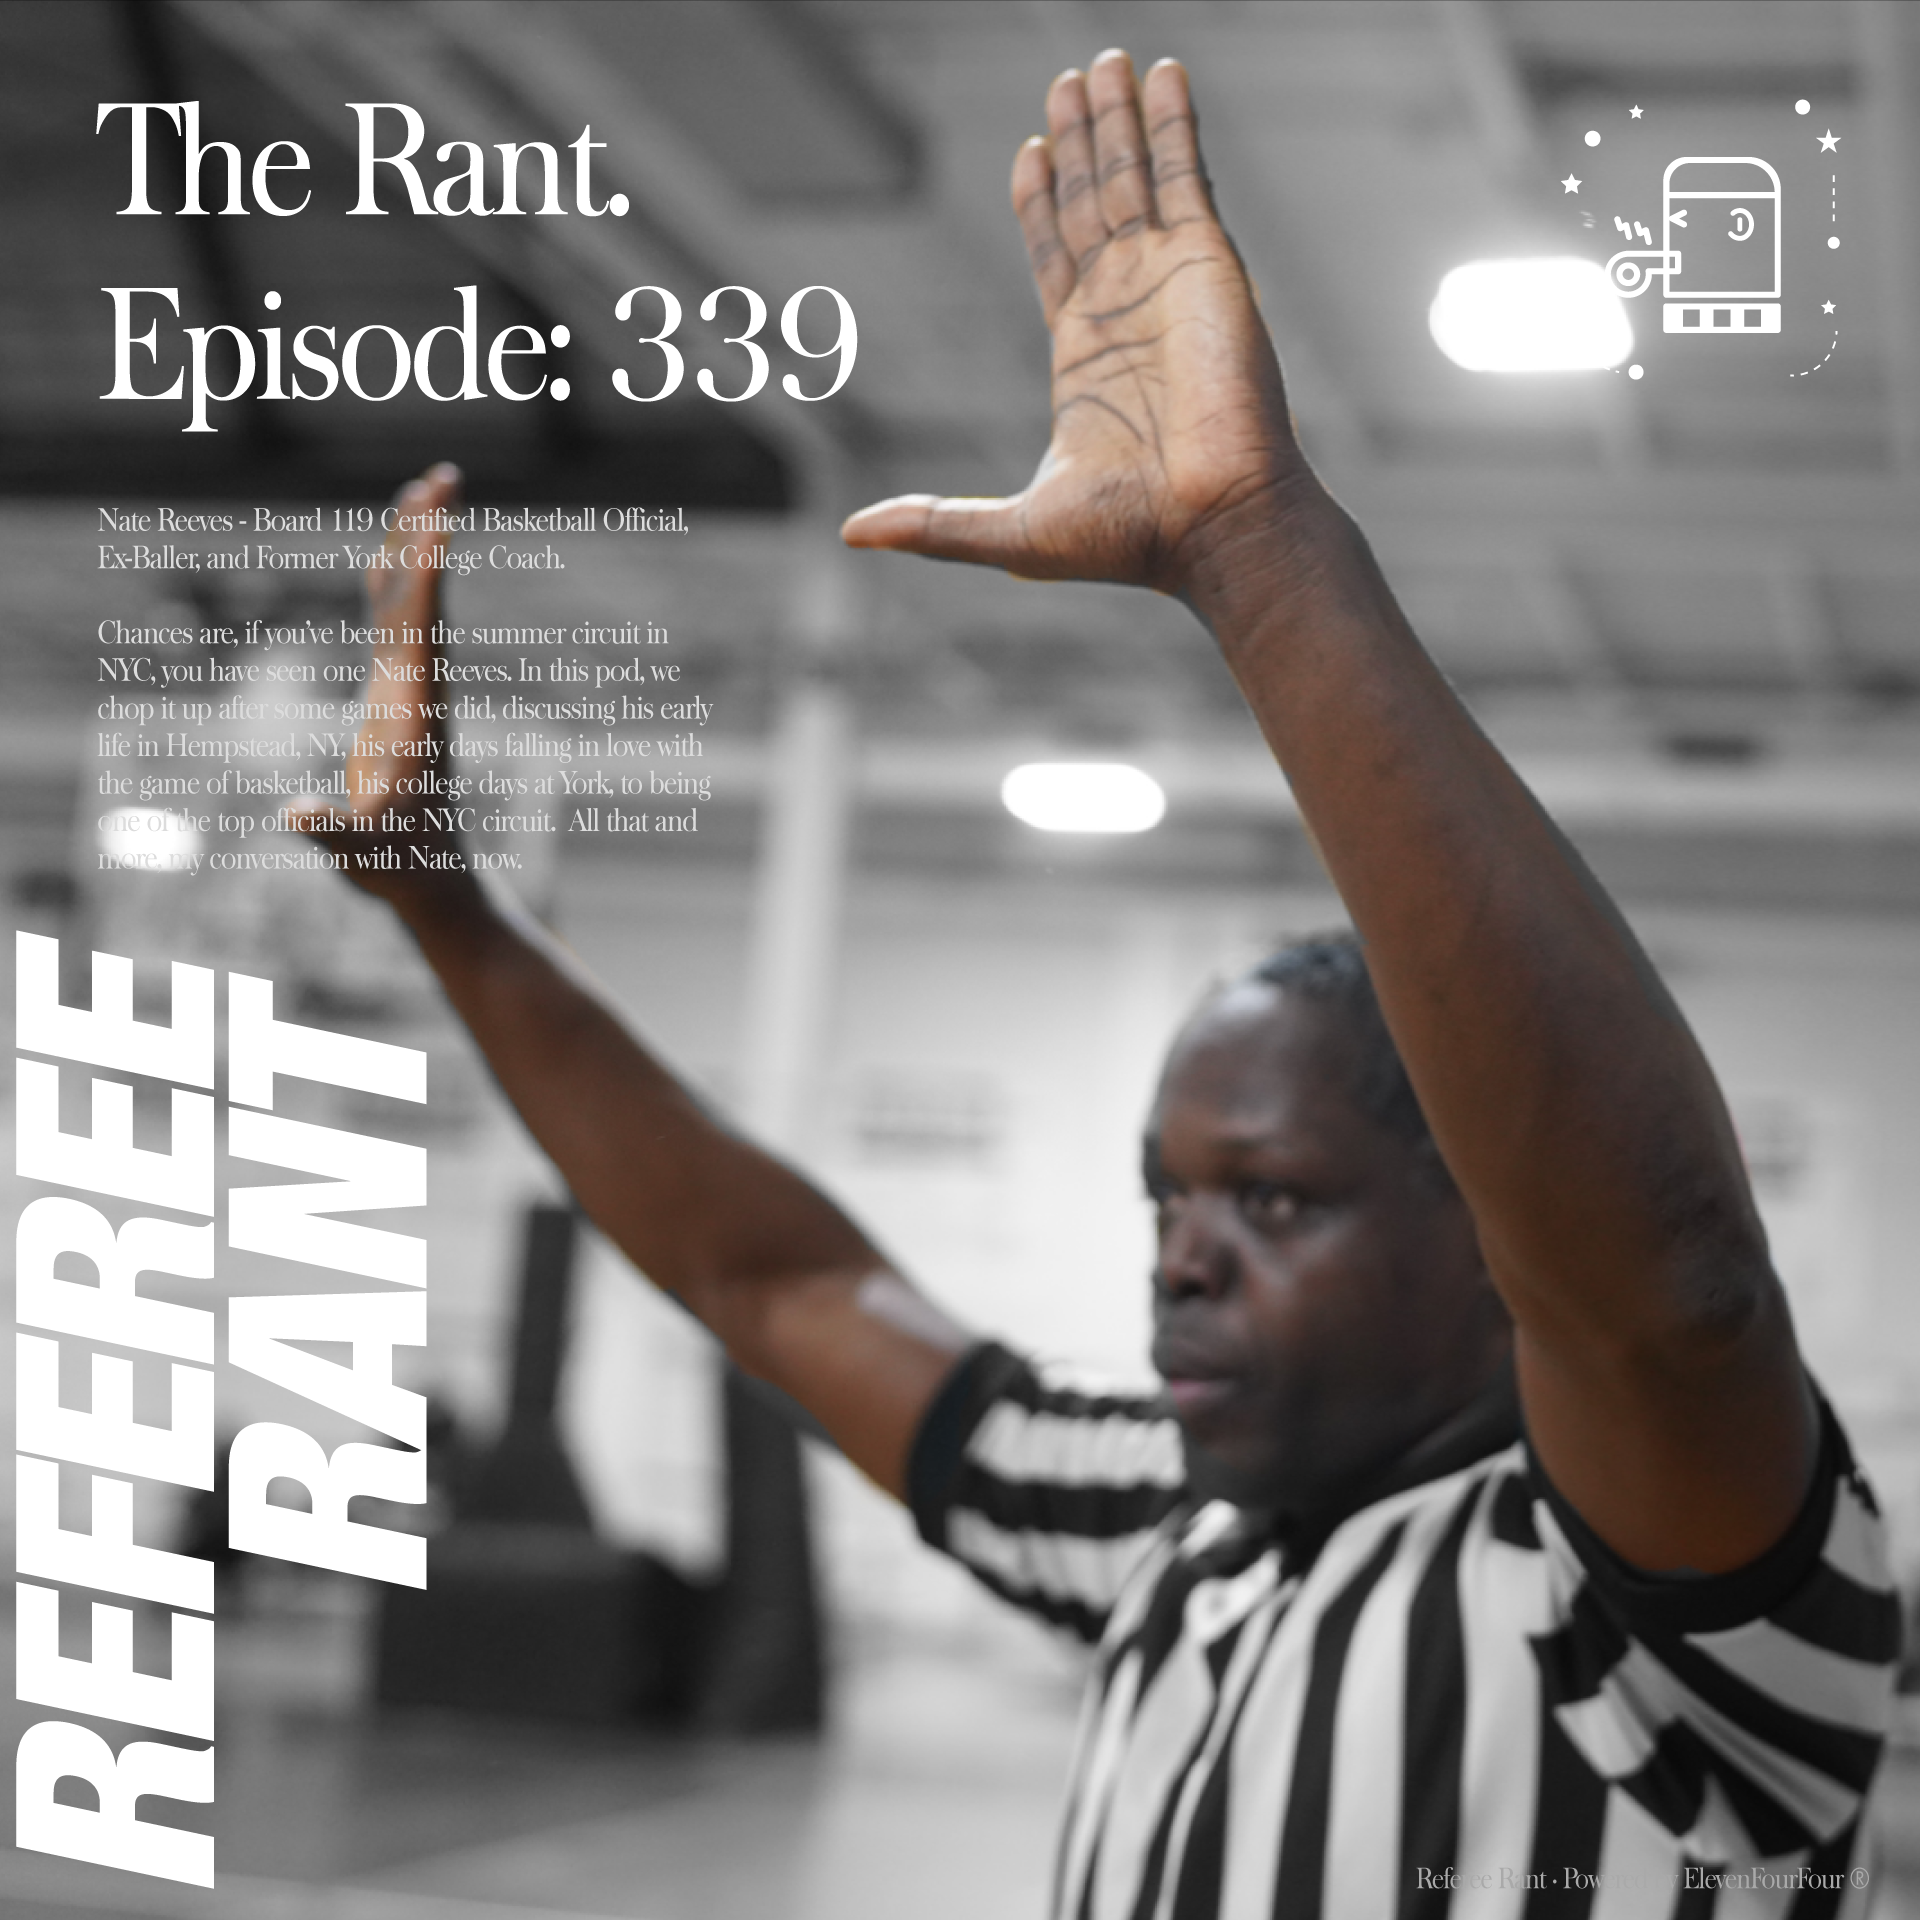 Episode 339, The Rant: Nate Reeves.